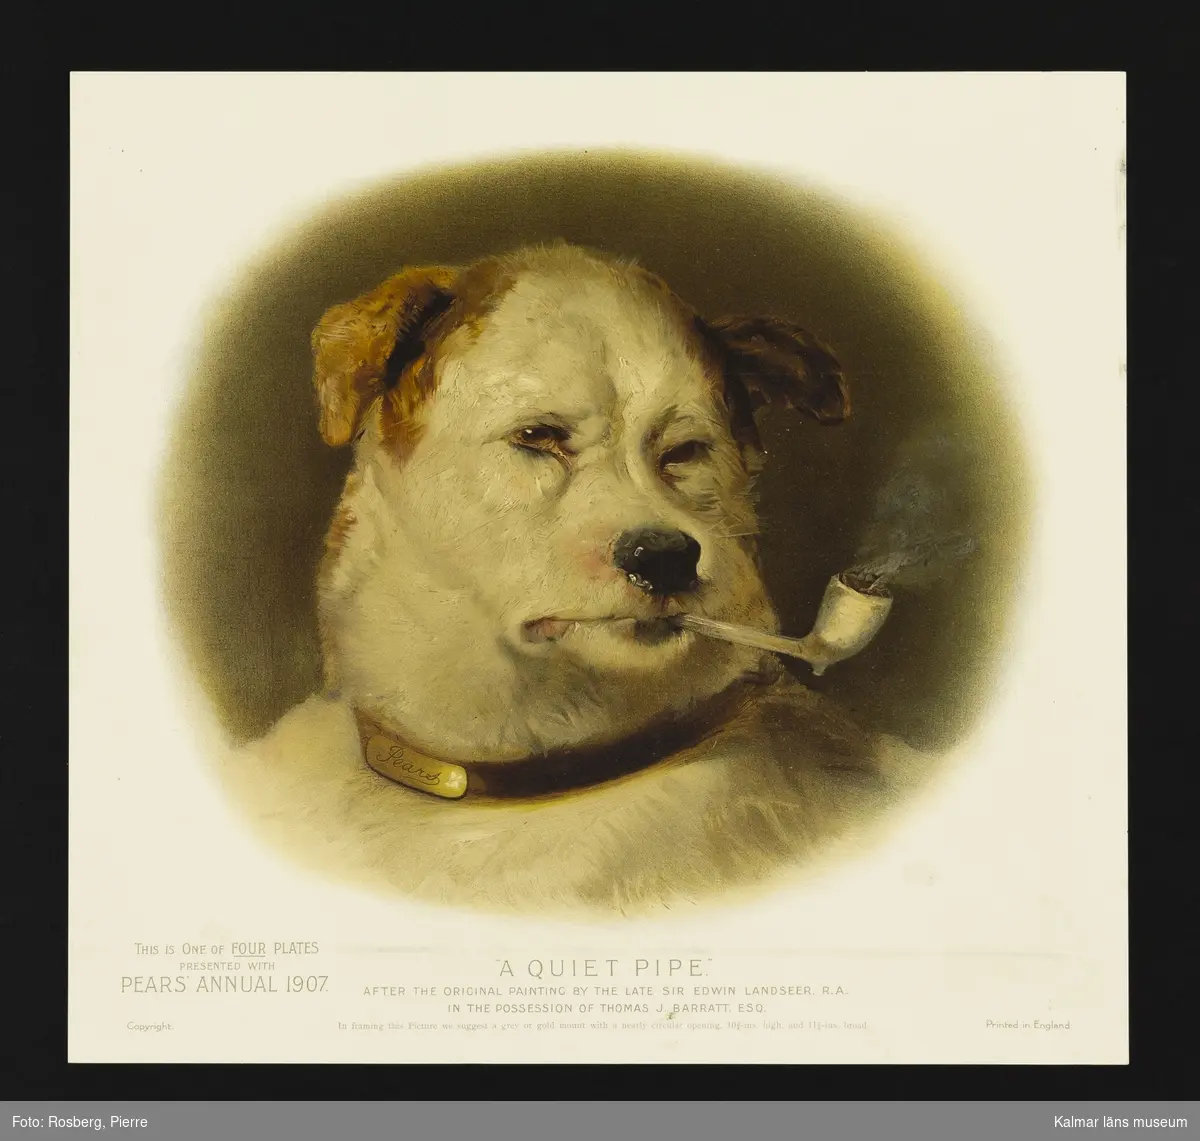 KLM 23970:49. Reklamaffisch. Text: "A Quite Pipe" after the original painting by the late Sir Edwin Landseer. R.A. In the possession of Thomas J Barrat, ESQ. Bild: En hund som röker pipa. In framing this Picture we suggest a grey or gold mount with nearly circular opening 10 3/4 -ins high and 11 1/4-ins broad. This is one of four Plates presented with Pears Annual 1907. Copyright. Printed in England.